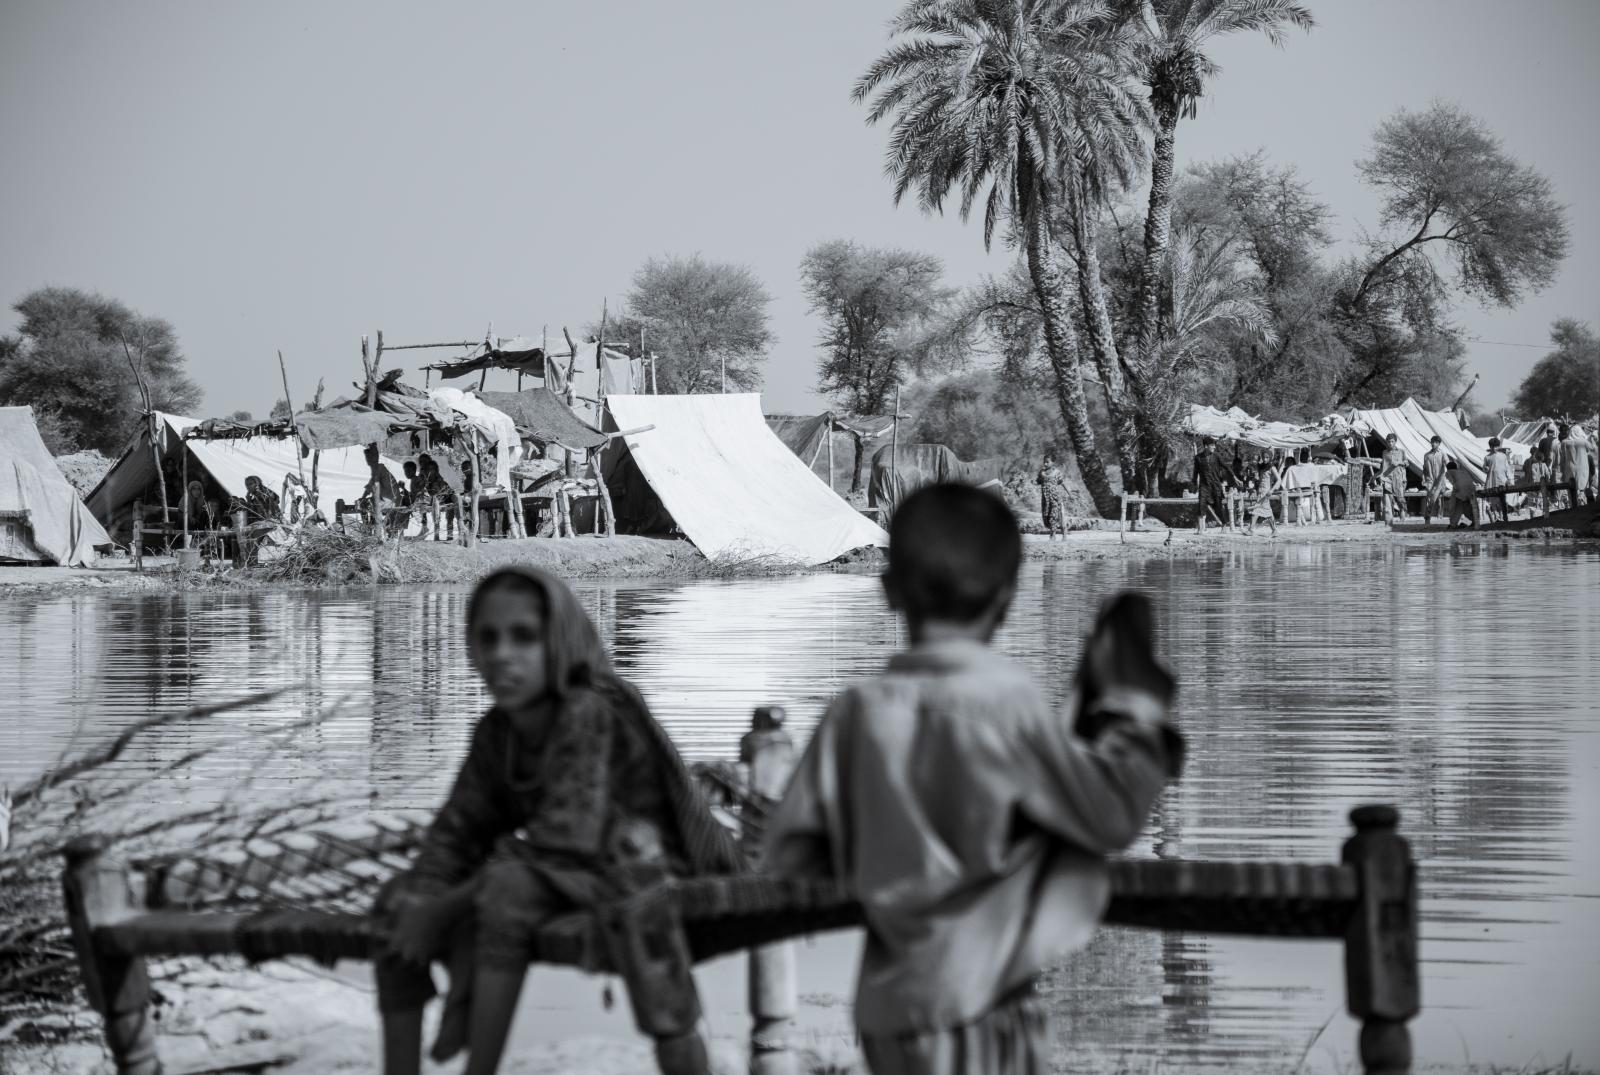 Discourses of Aftermath in Shikarpur - While her siblings play under the scorching sun; this...